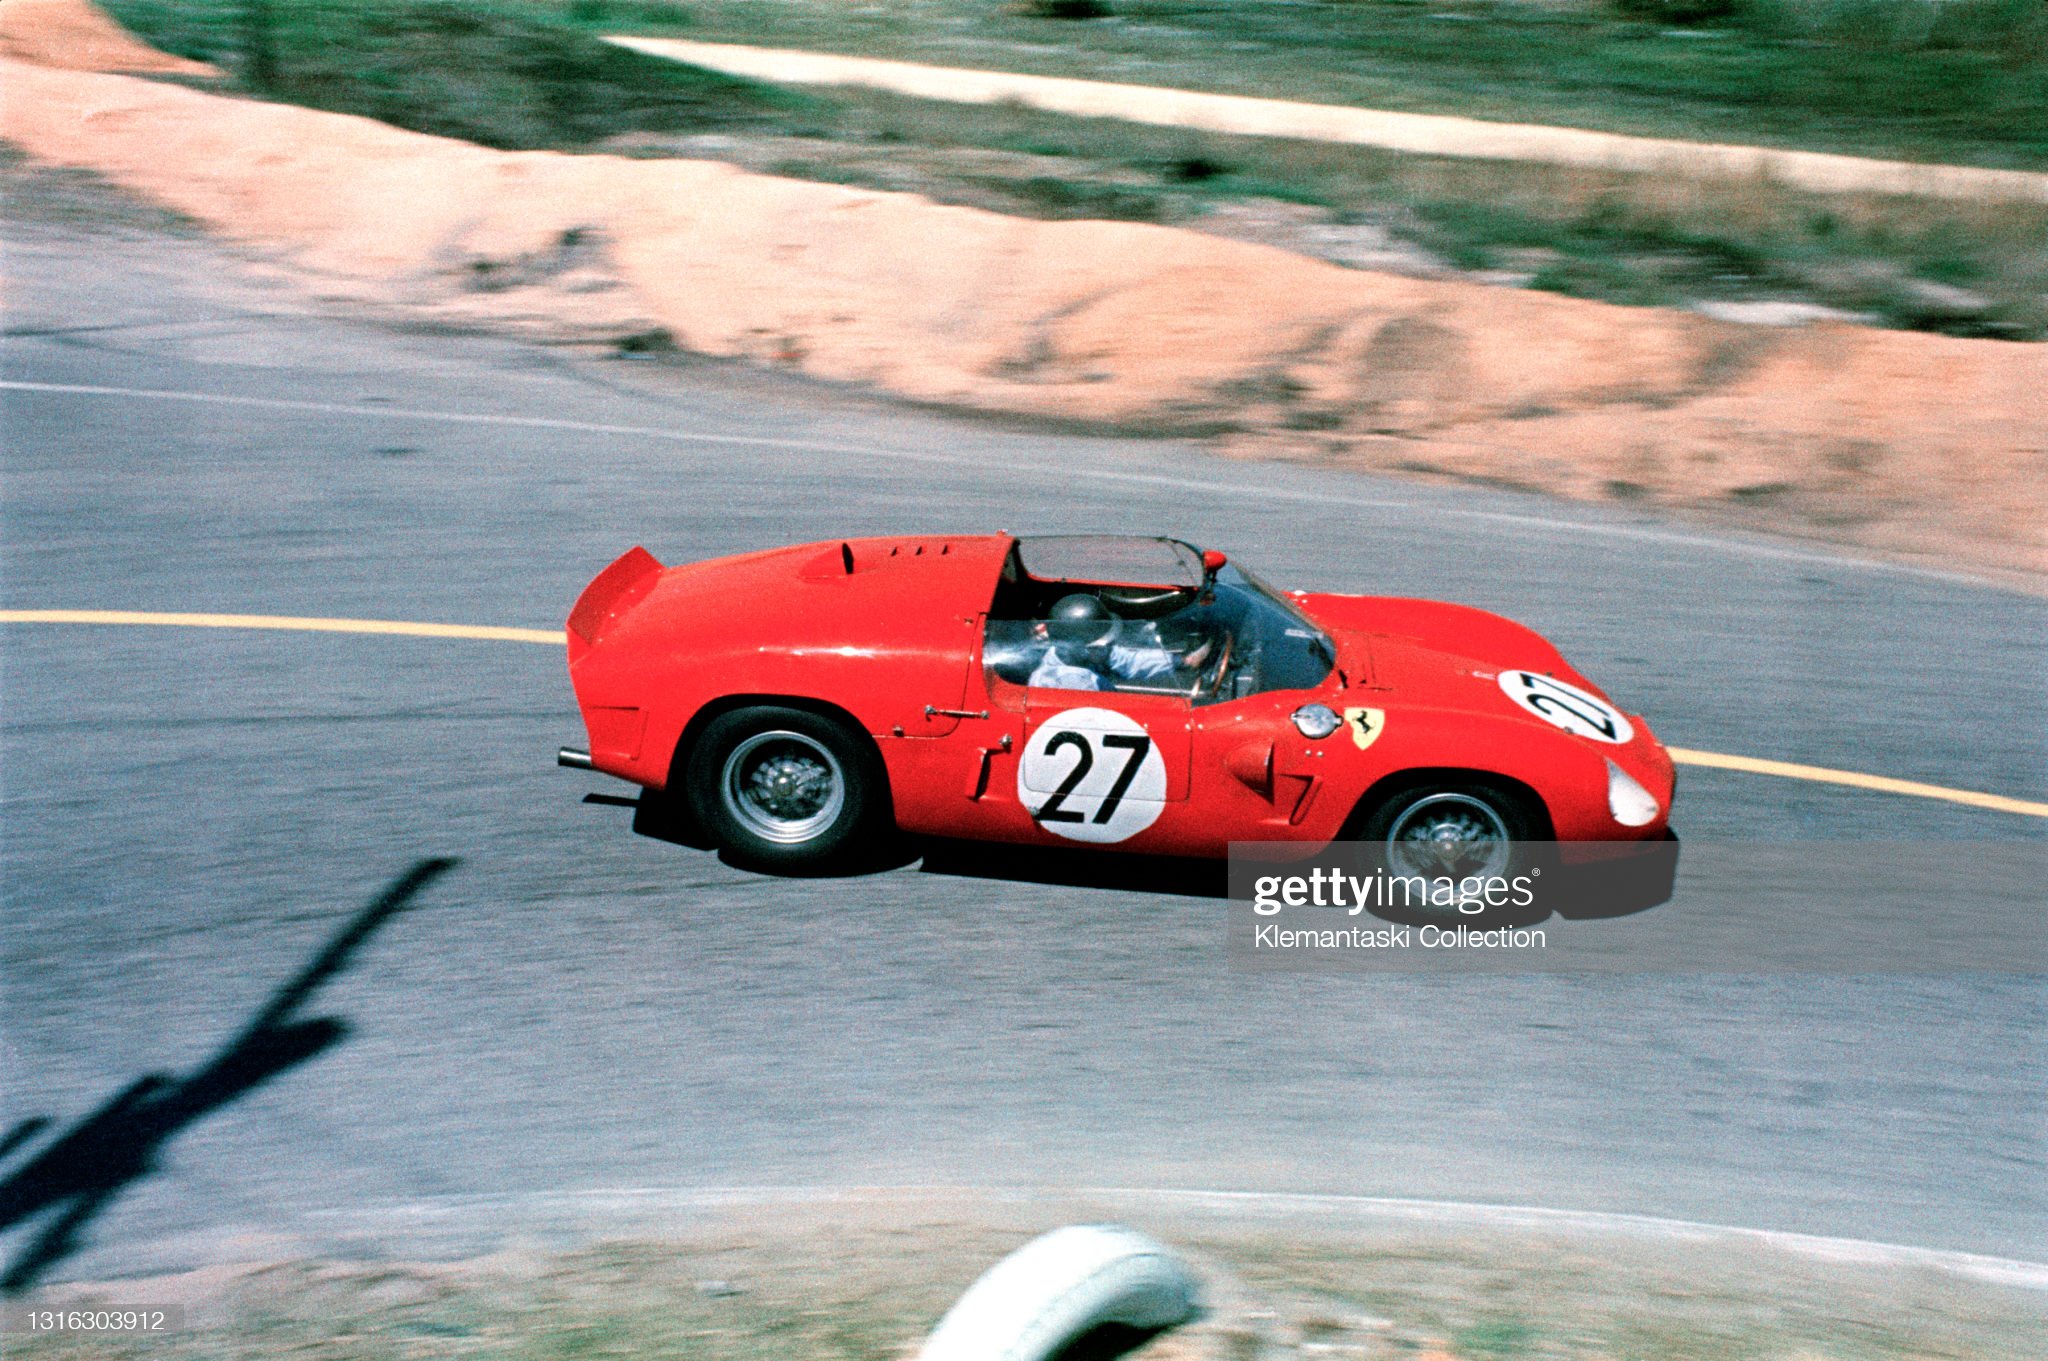 Richie Ginther at the Hairpin in his Ferrari 246 SP which he shared with von Trips, they did not finish, Sebring 12 Hours, March 24, 1961. 